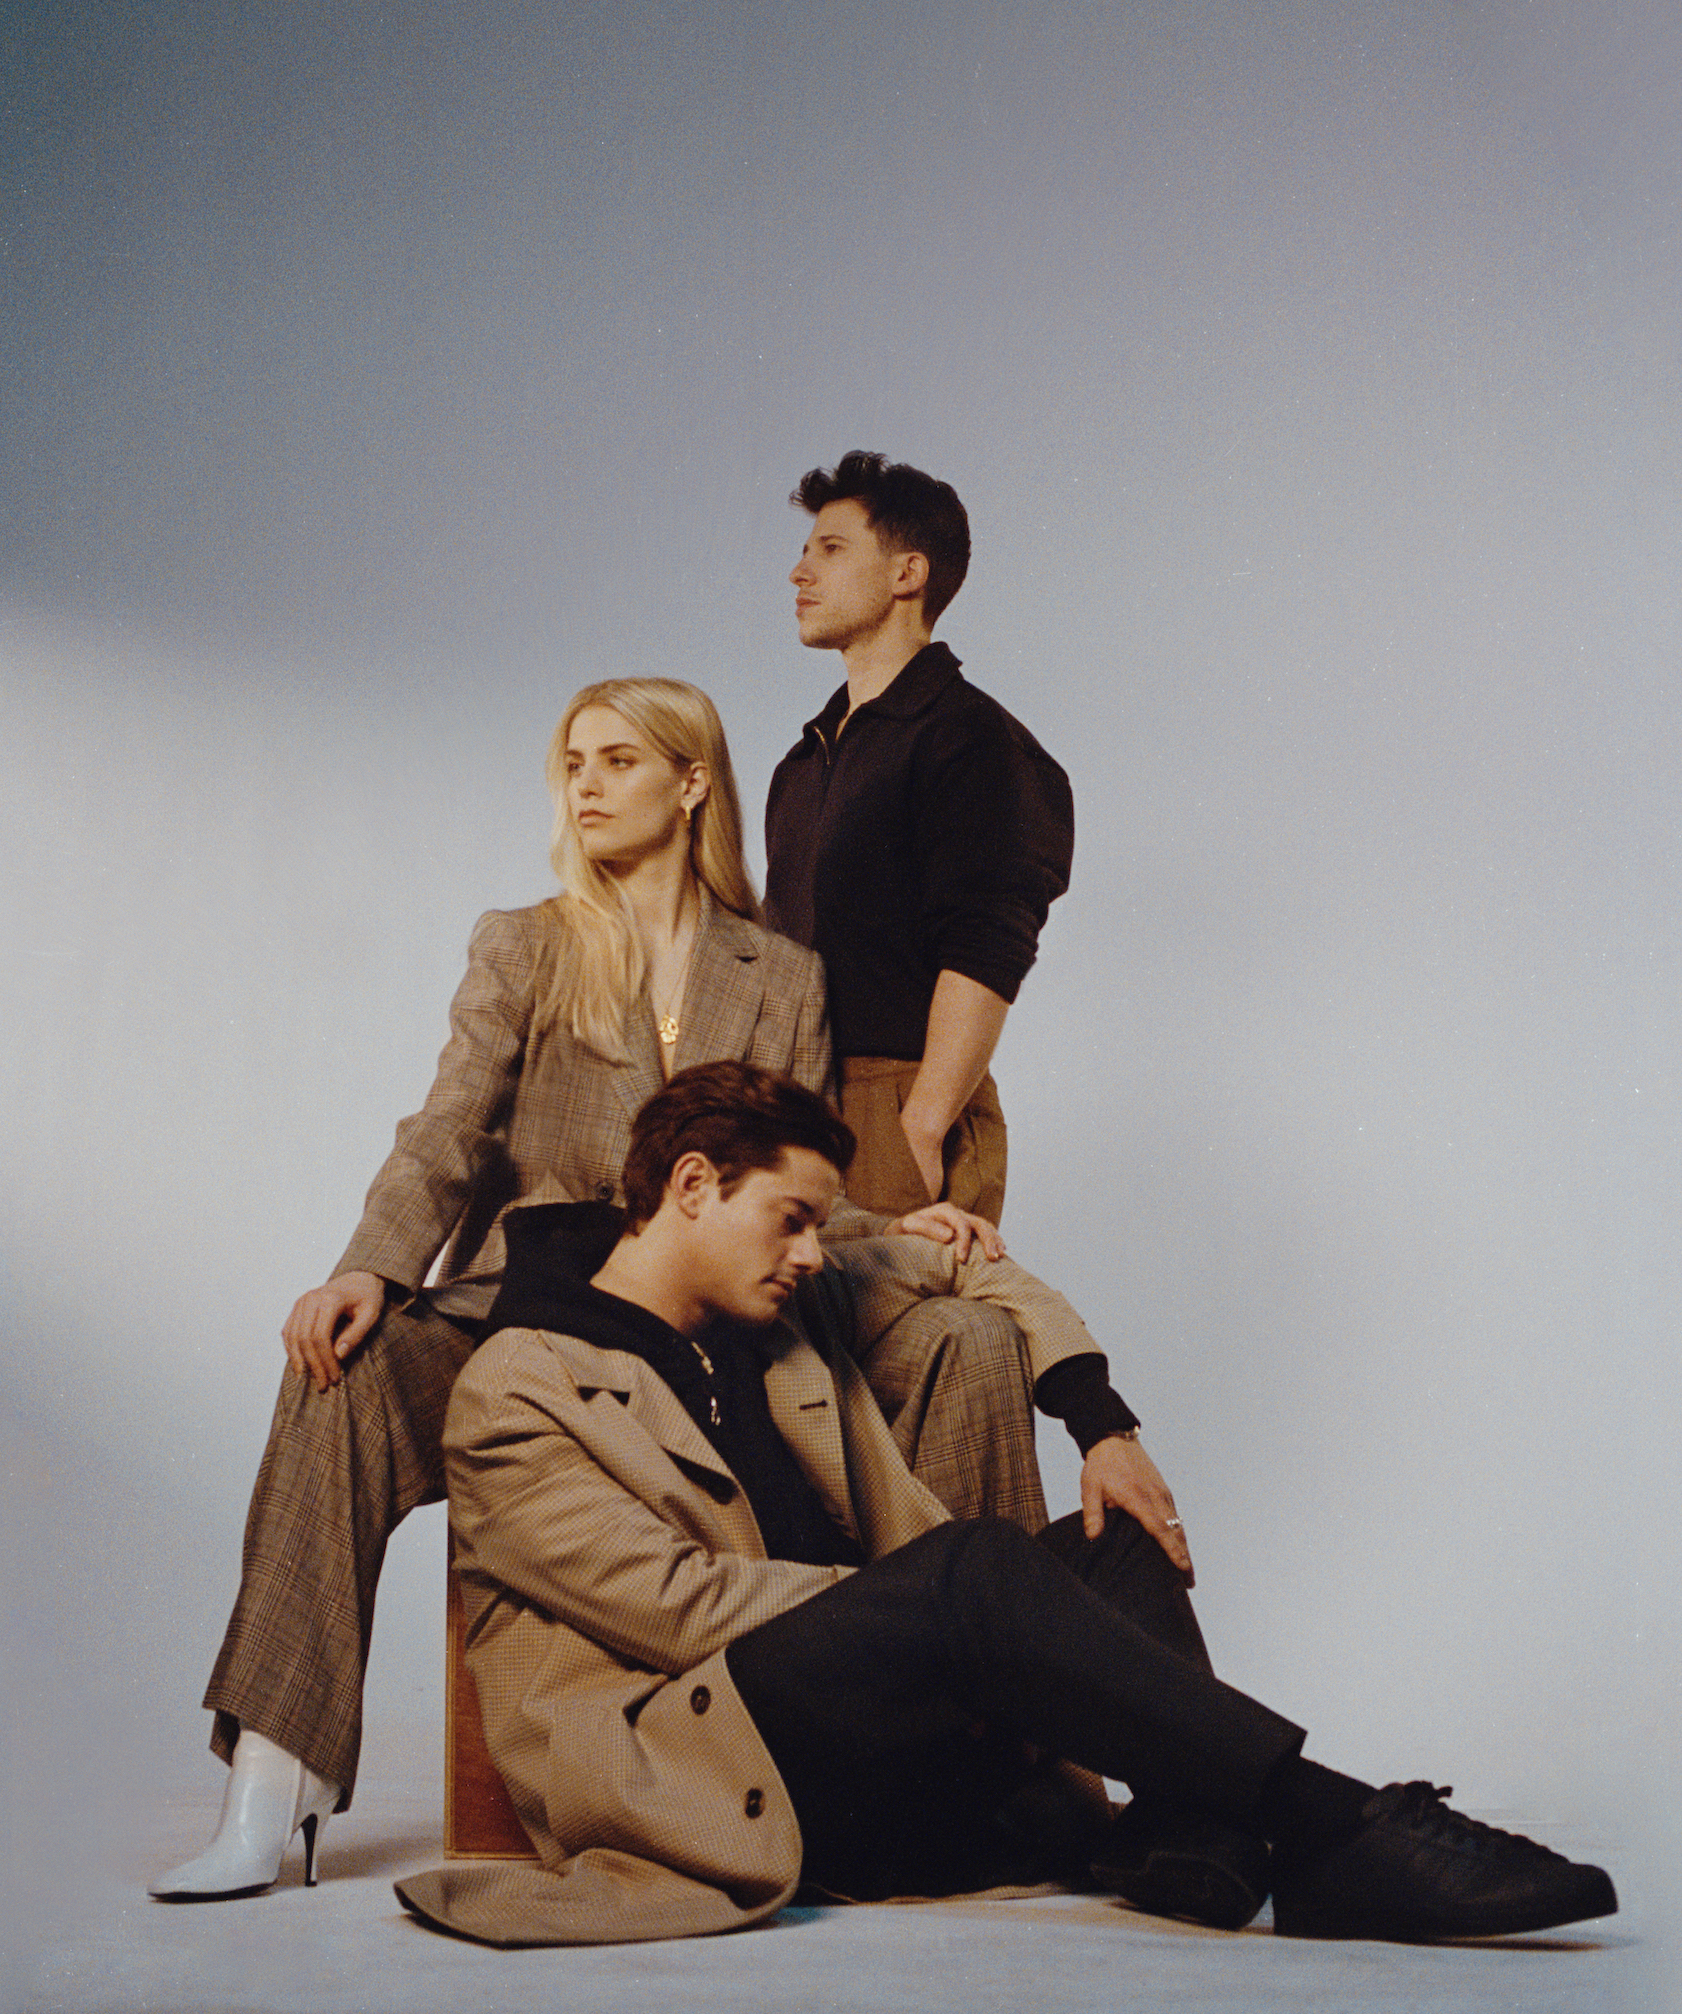 LONDON GRAMMAR SHARE VIDEO FOR LATEST SINGLE ‘BABY IT’S YOU’ OUT NOW